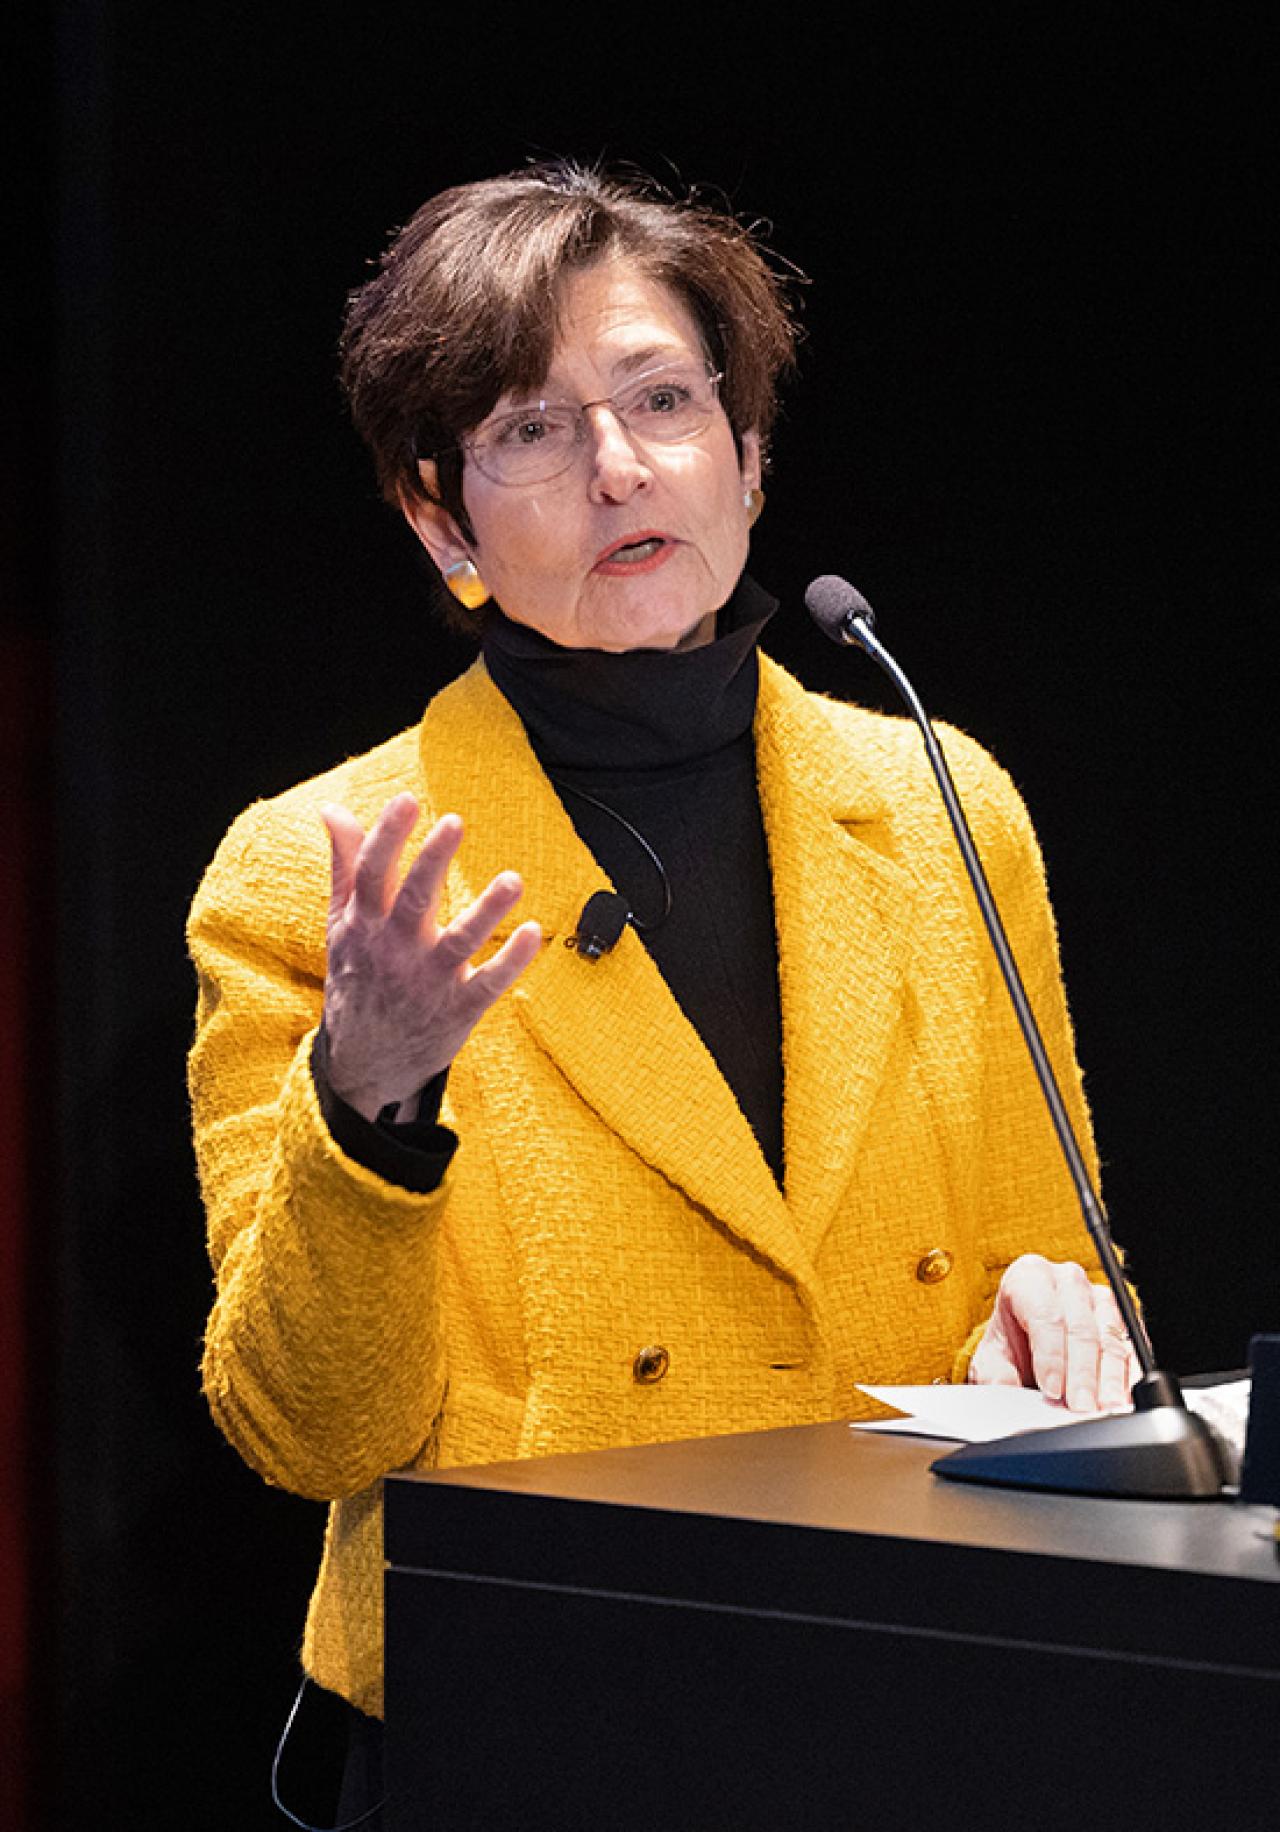 A woman in a yellow jacket speaks at a podium